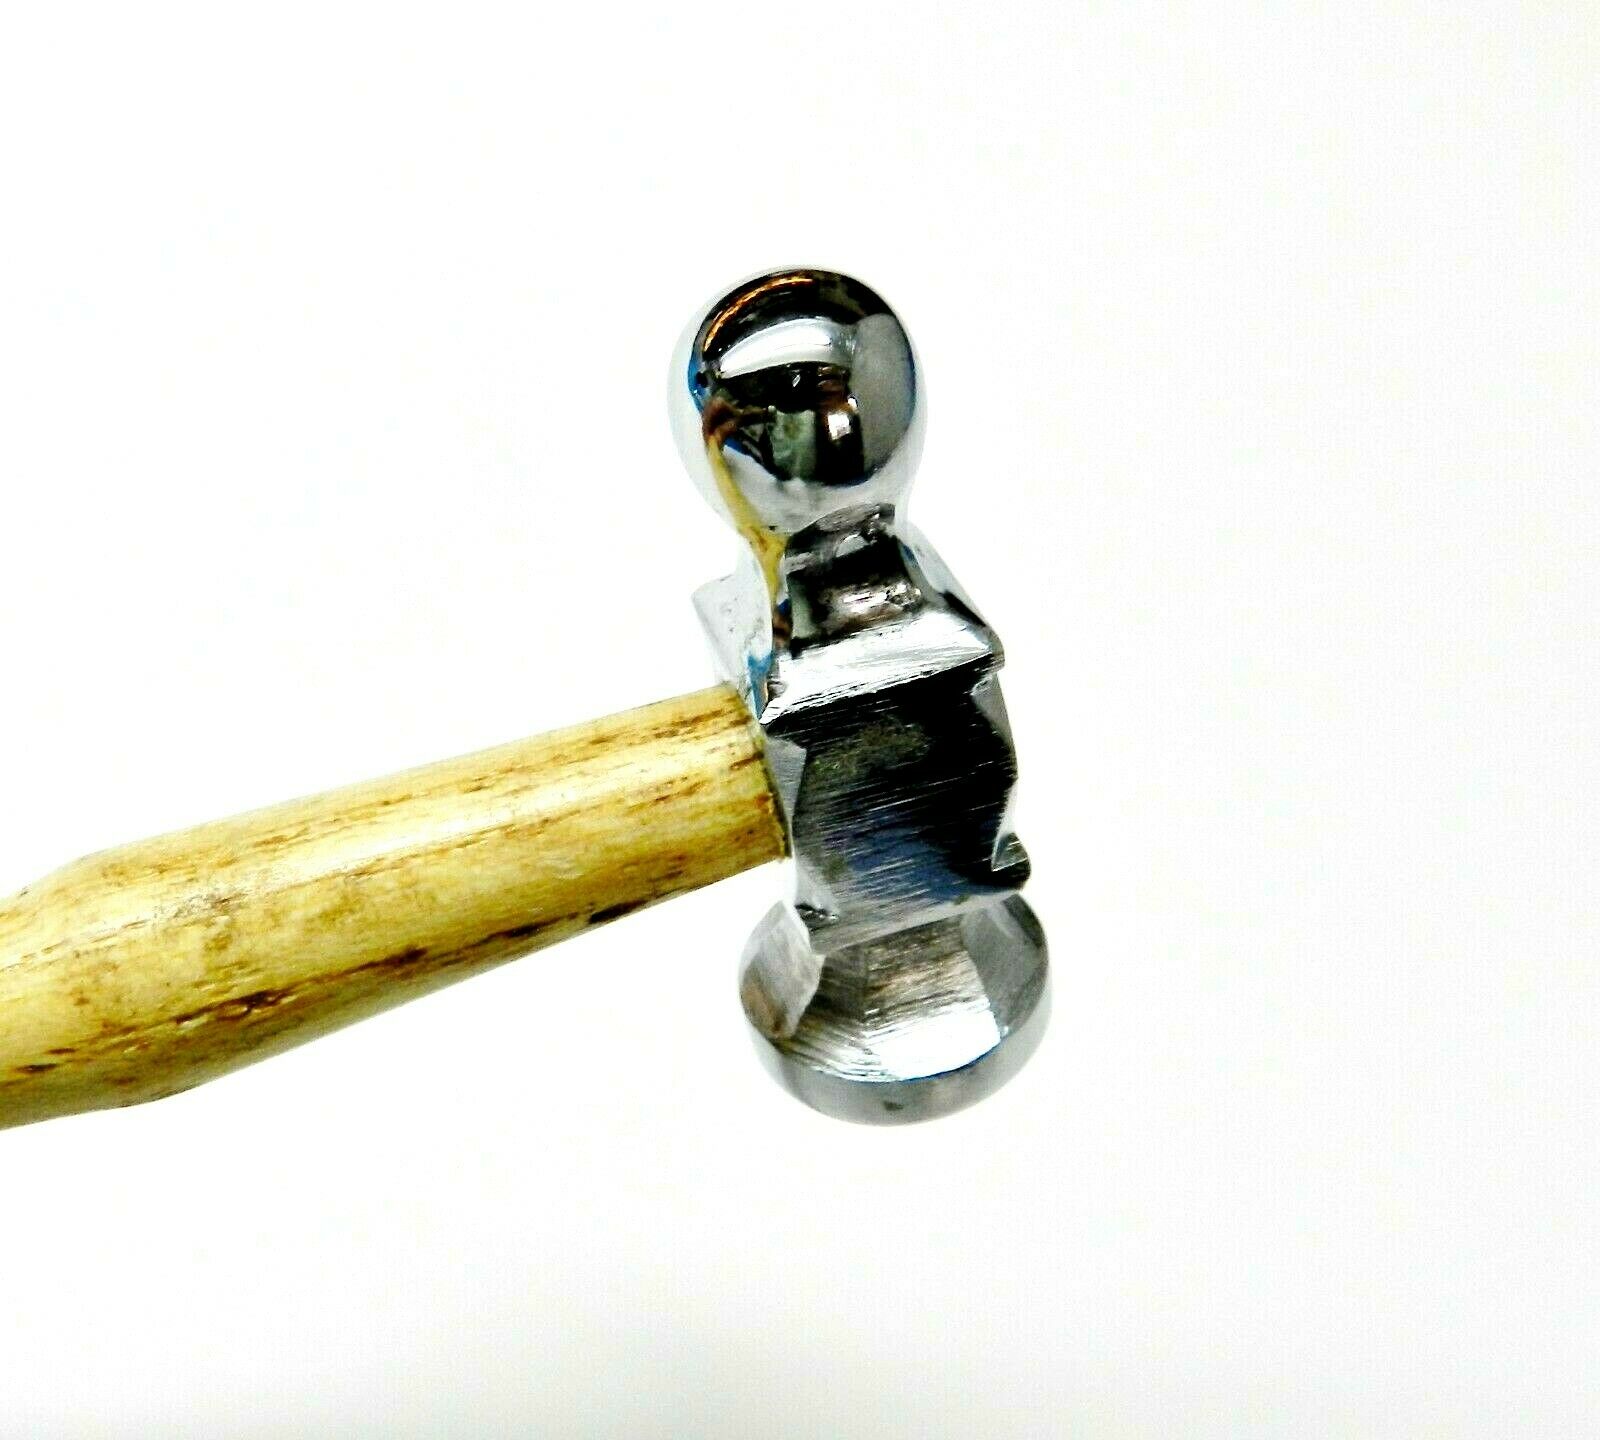 Jewelers Chasing Hammer 7/8 - 22mm Small Flat Face Jewelry Hammers